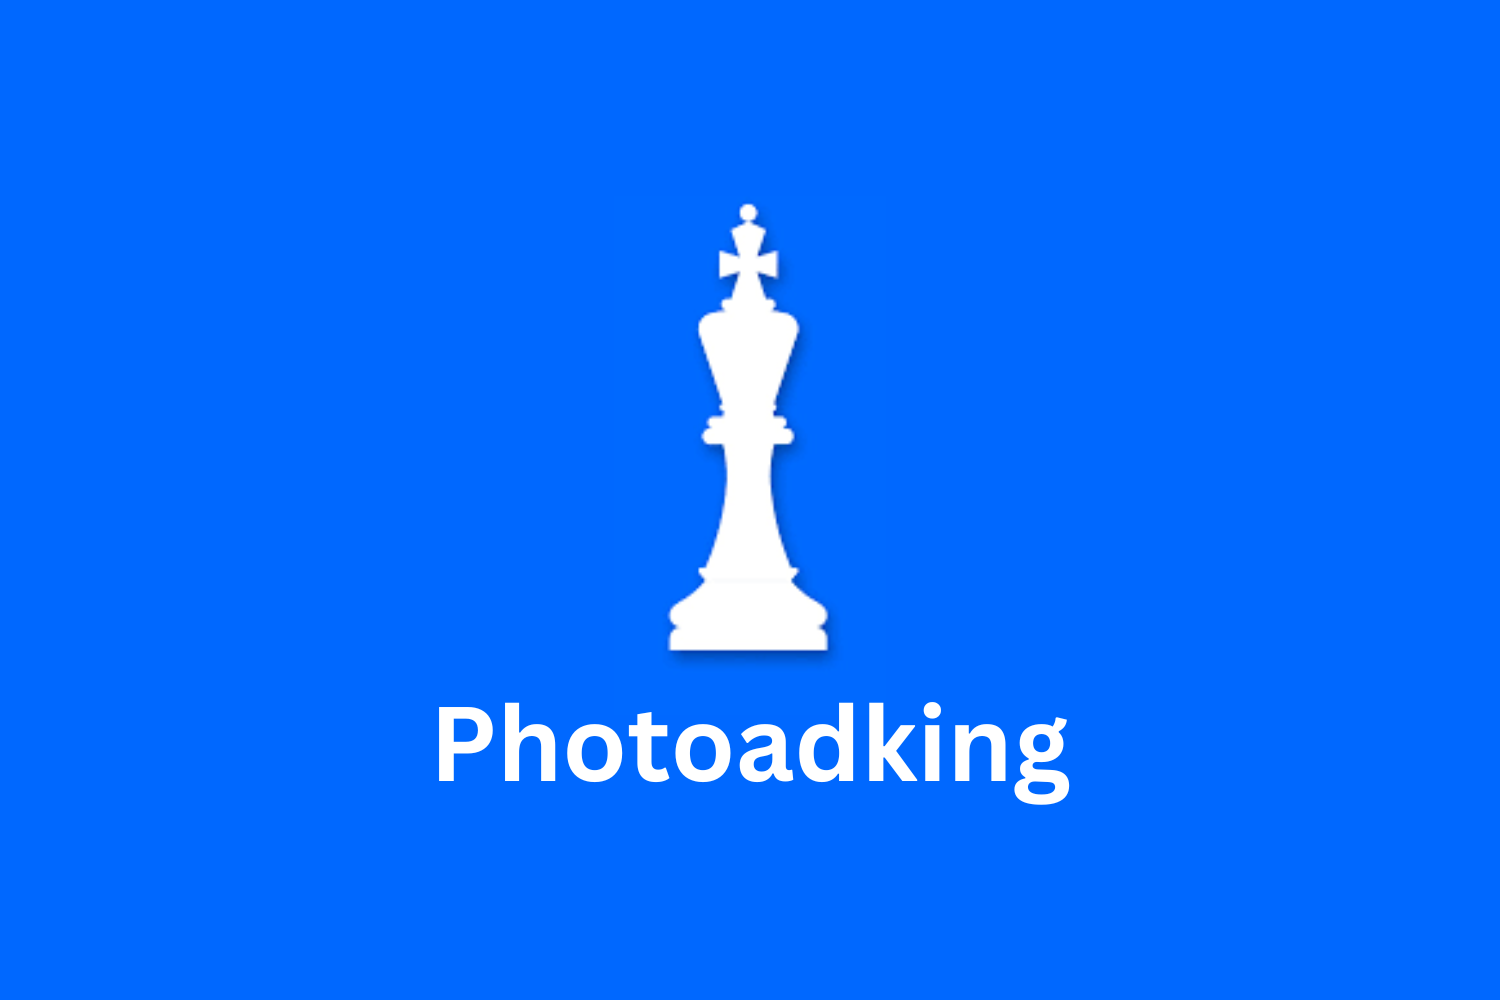 How Photoadking Works